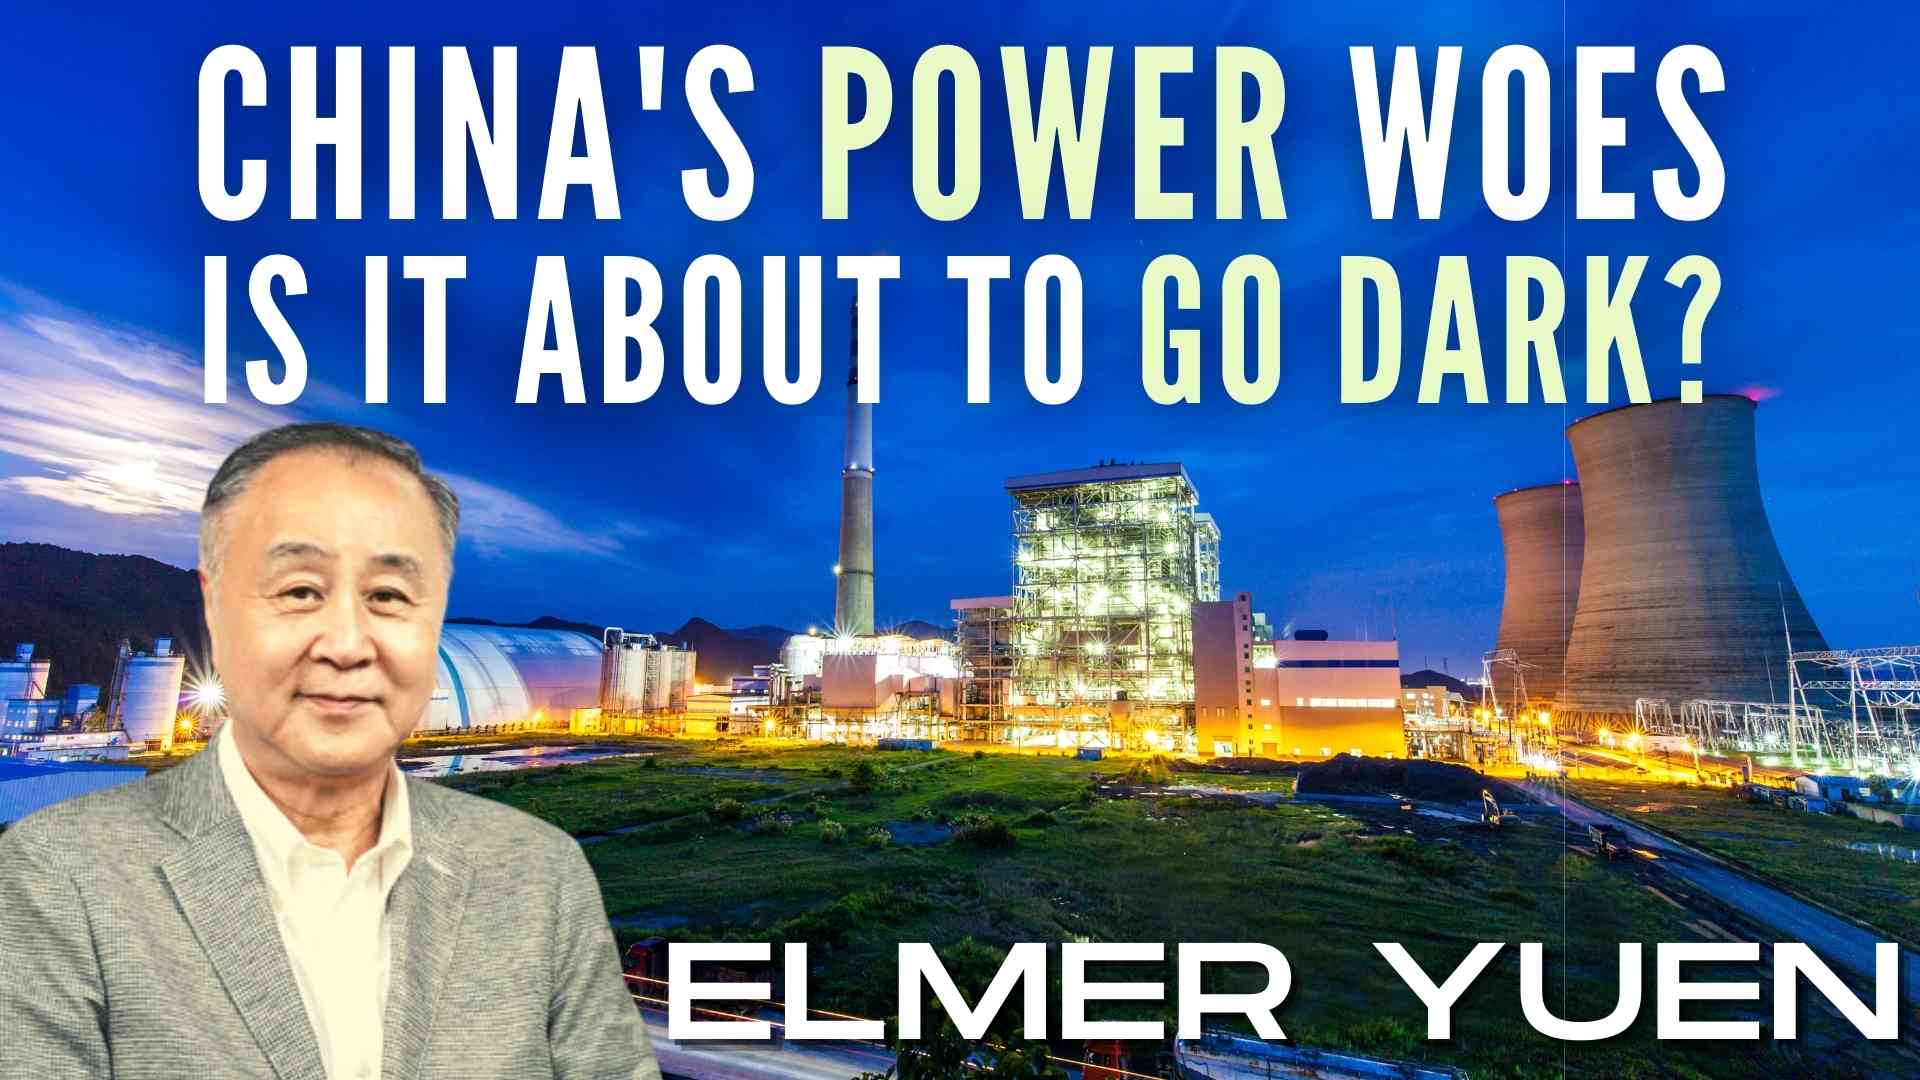 Elmer Yuen | In a wide-ranging discussion on China's power woes, Elmer Yuen explains what is playing out in China, now that even Indonesia has stopped exporting coal. On top of that one of the Nuclear power plant, a joint venture with France has developed issues - watch this video to find out why Elmer suspect China's role in Kudankulam Unit 2 power outage.